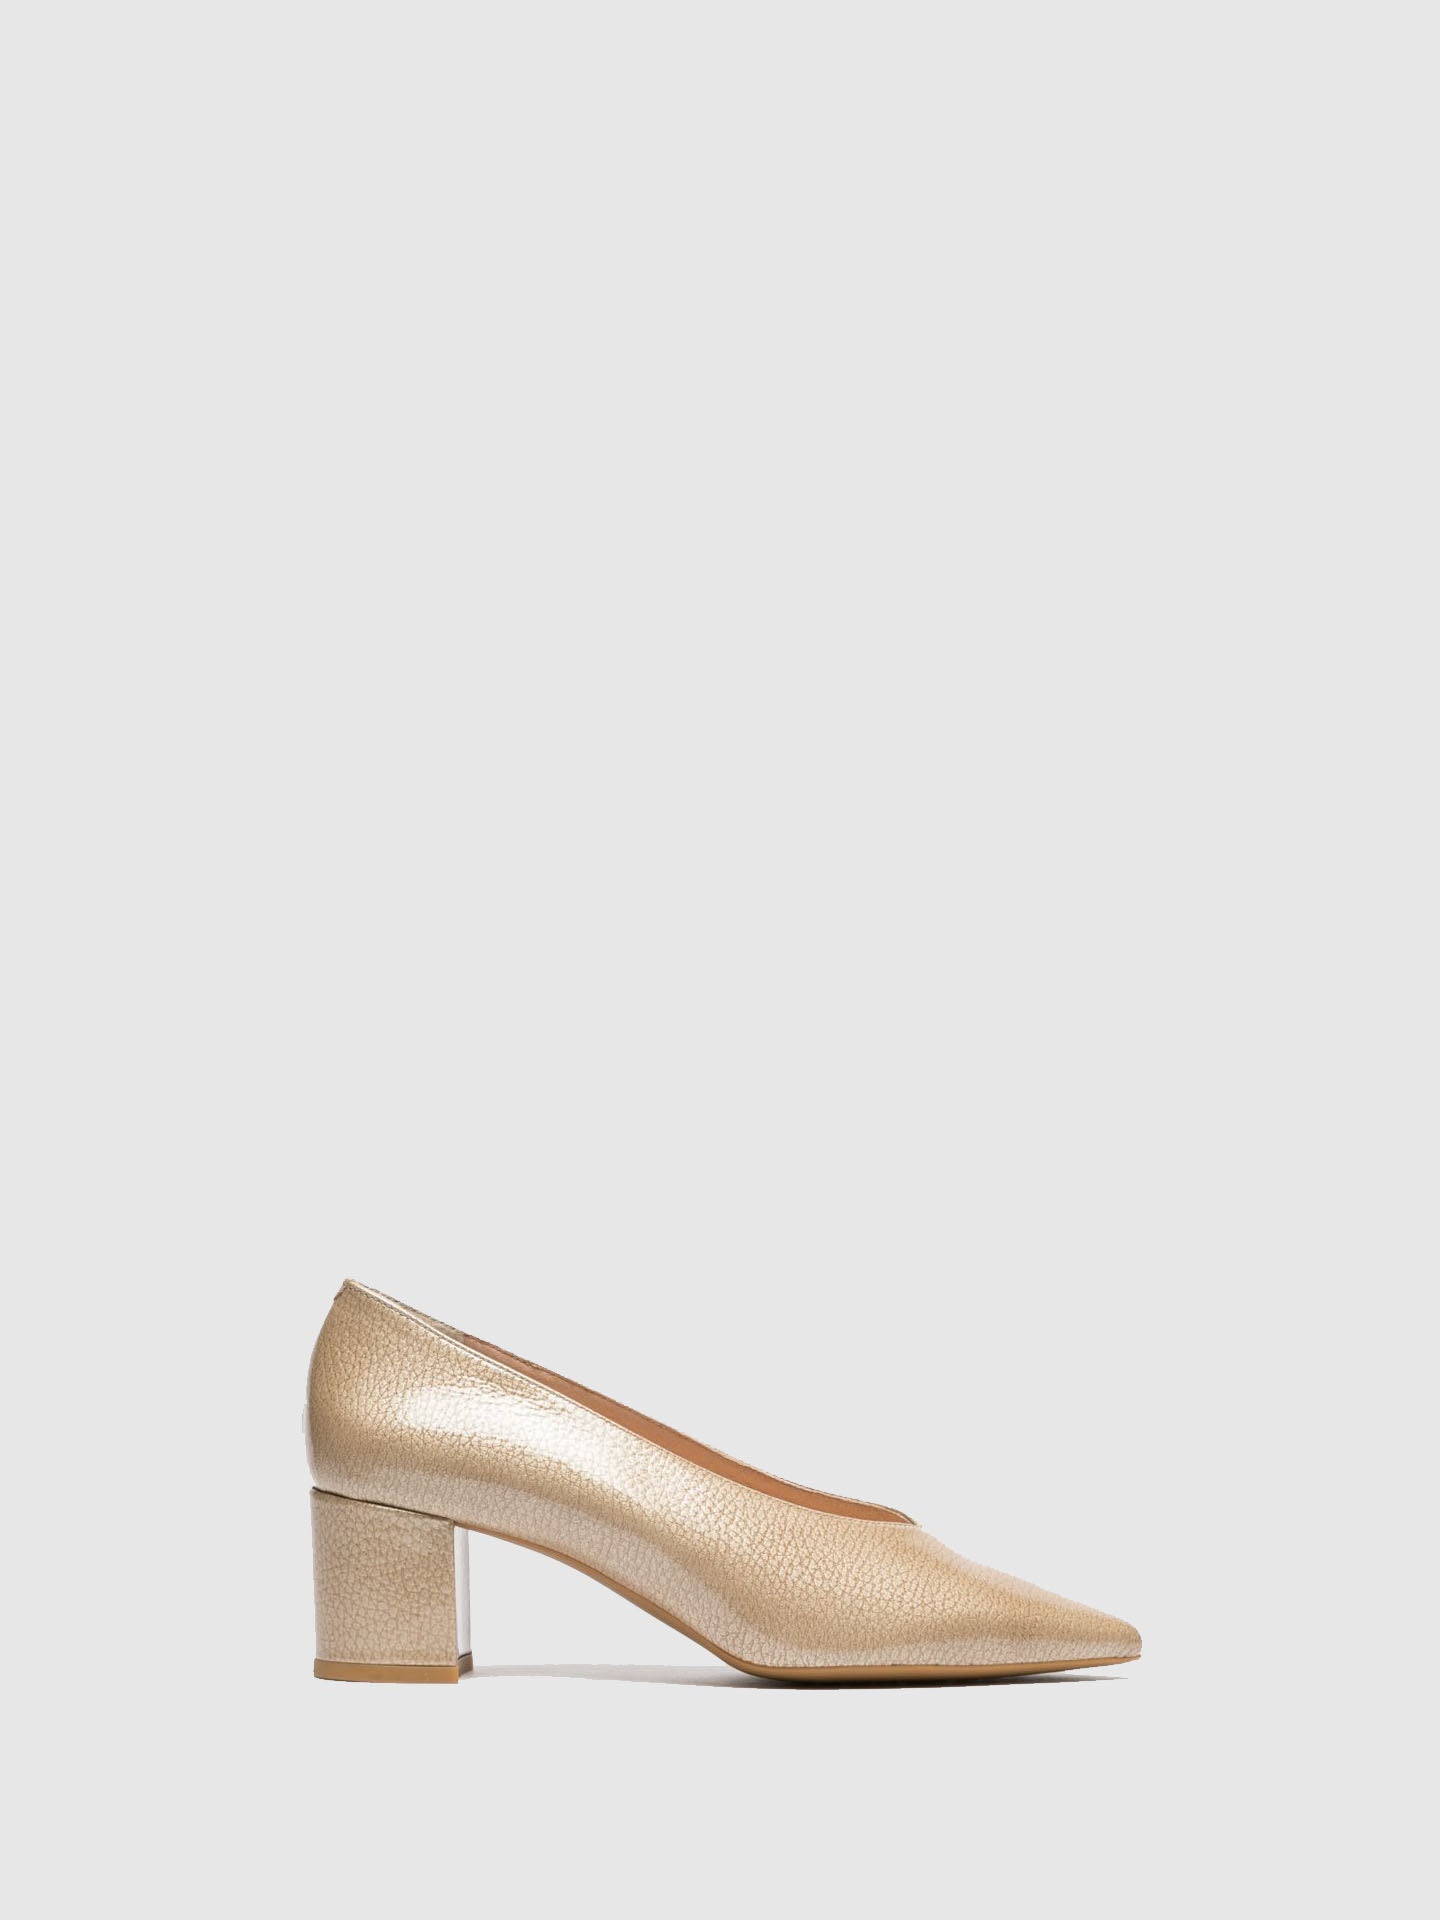 Sofia Costa Beige Pointed Toe Pumps Shoes